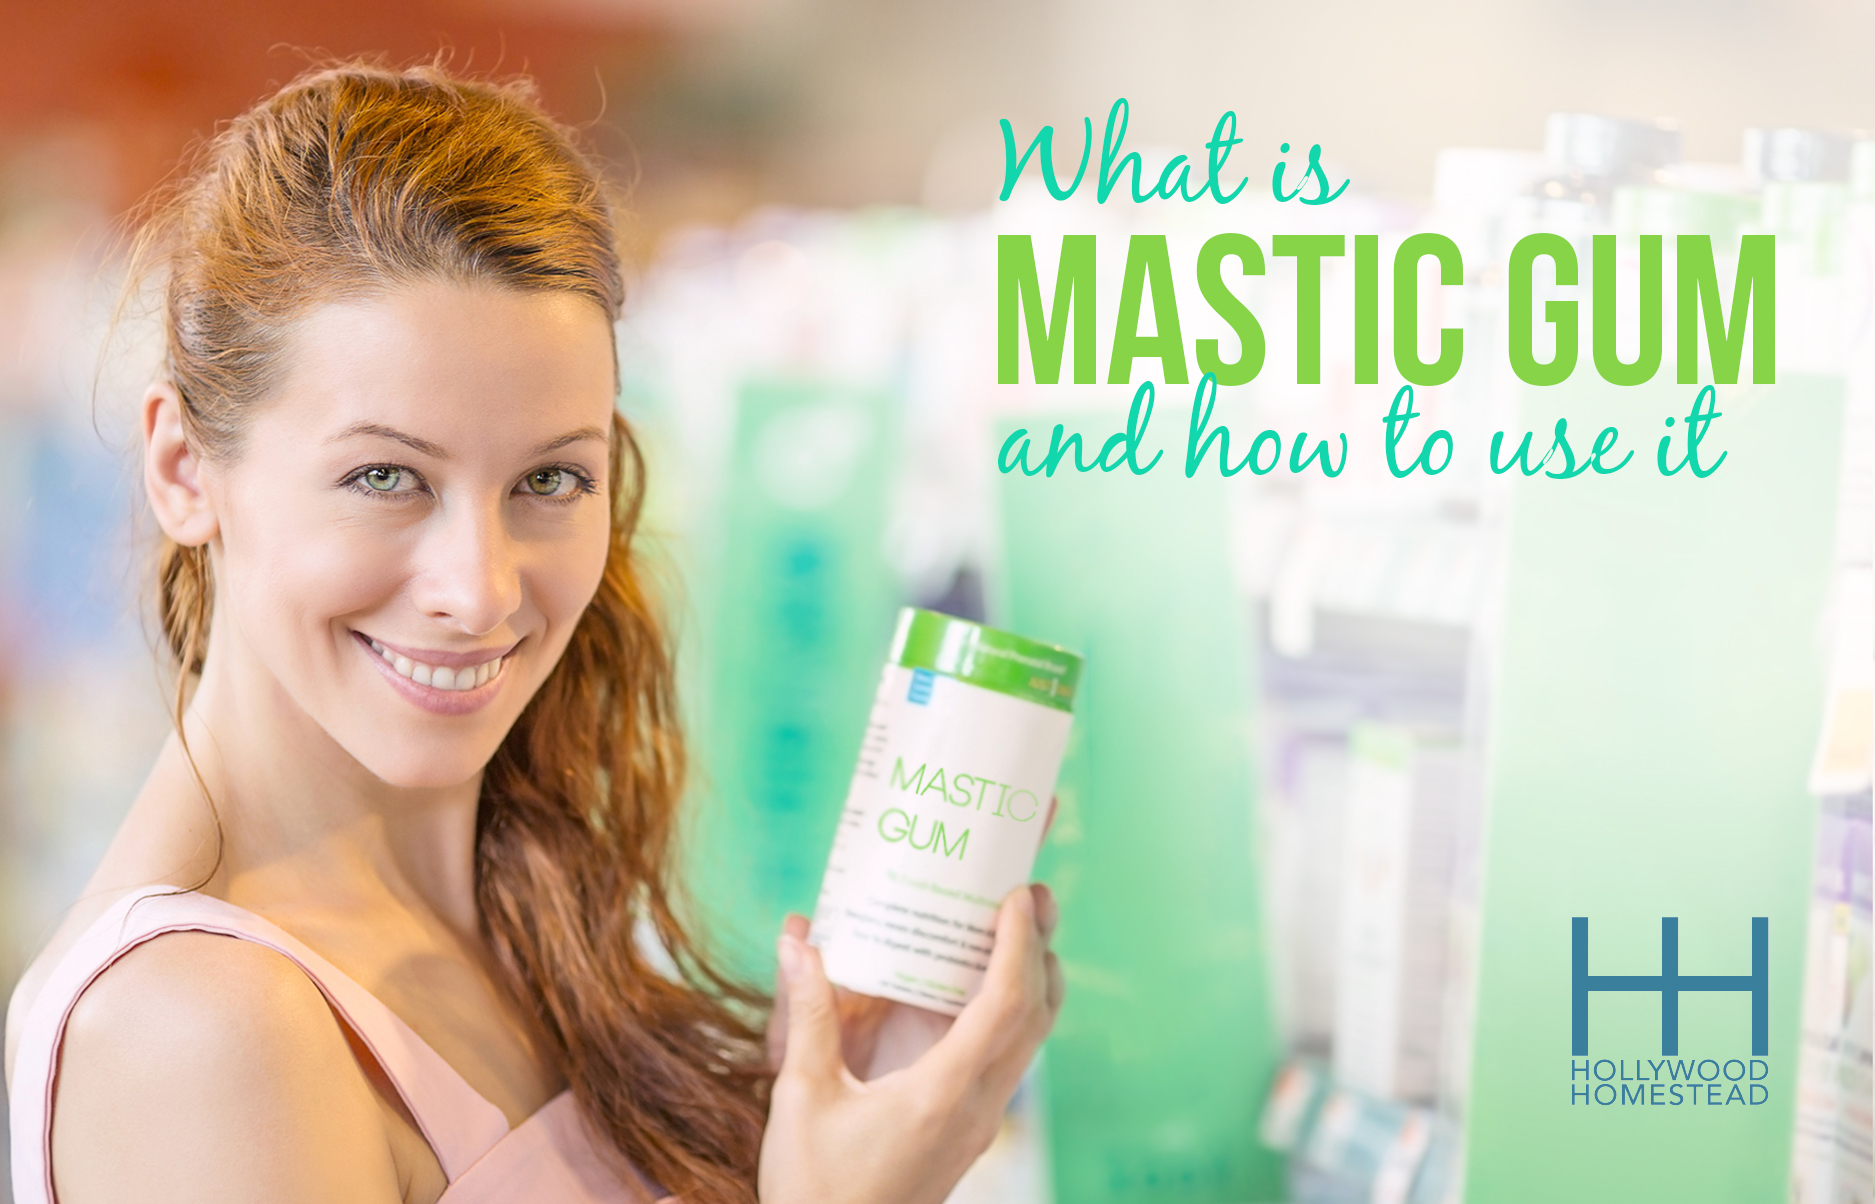 What Is Mastic Gum and How to Use It